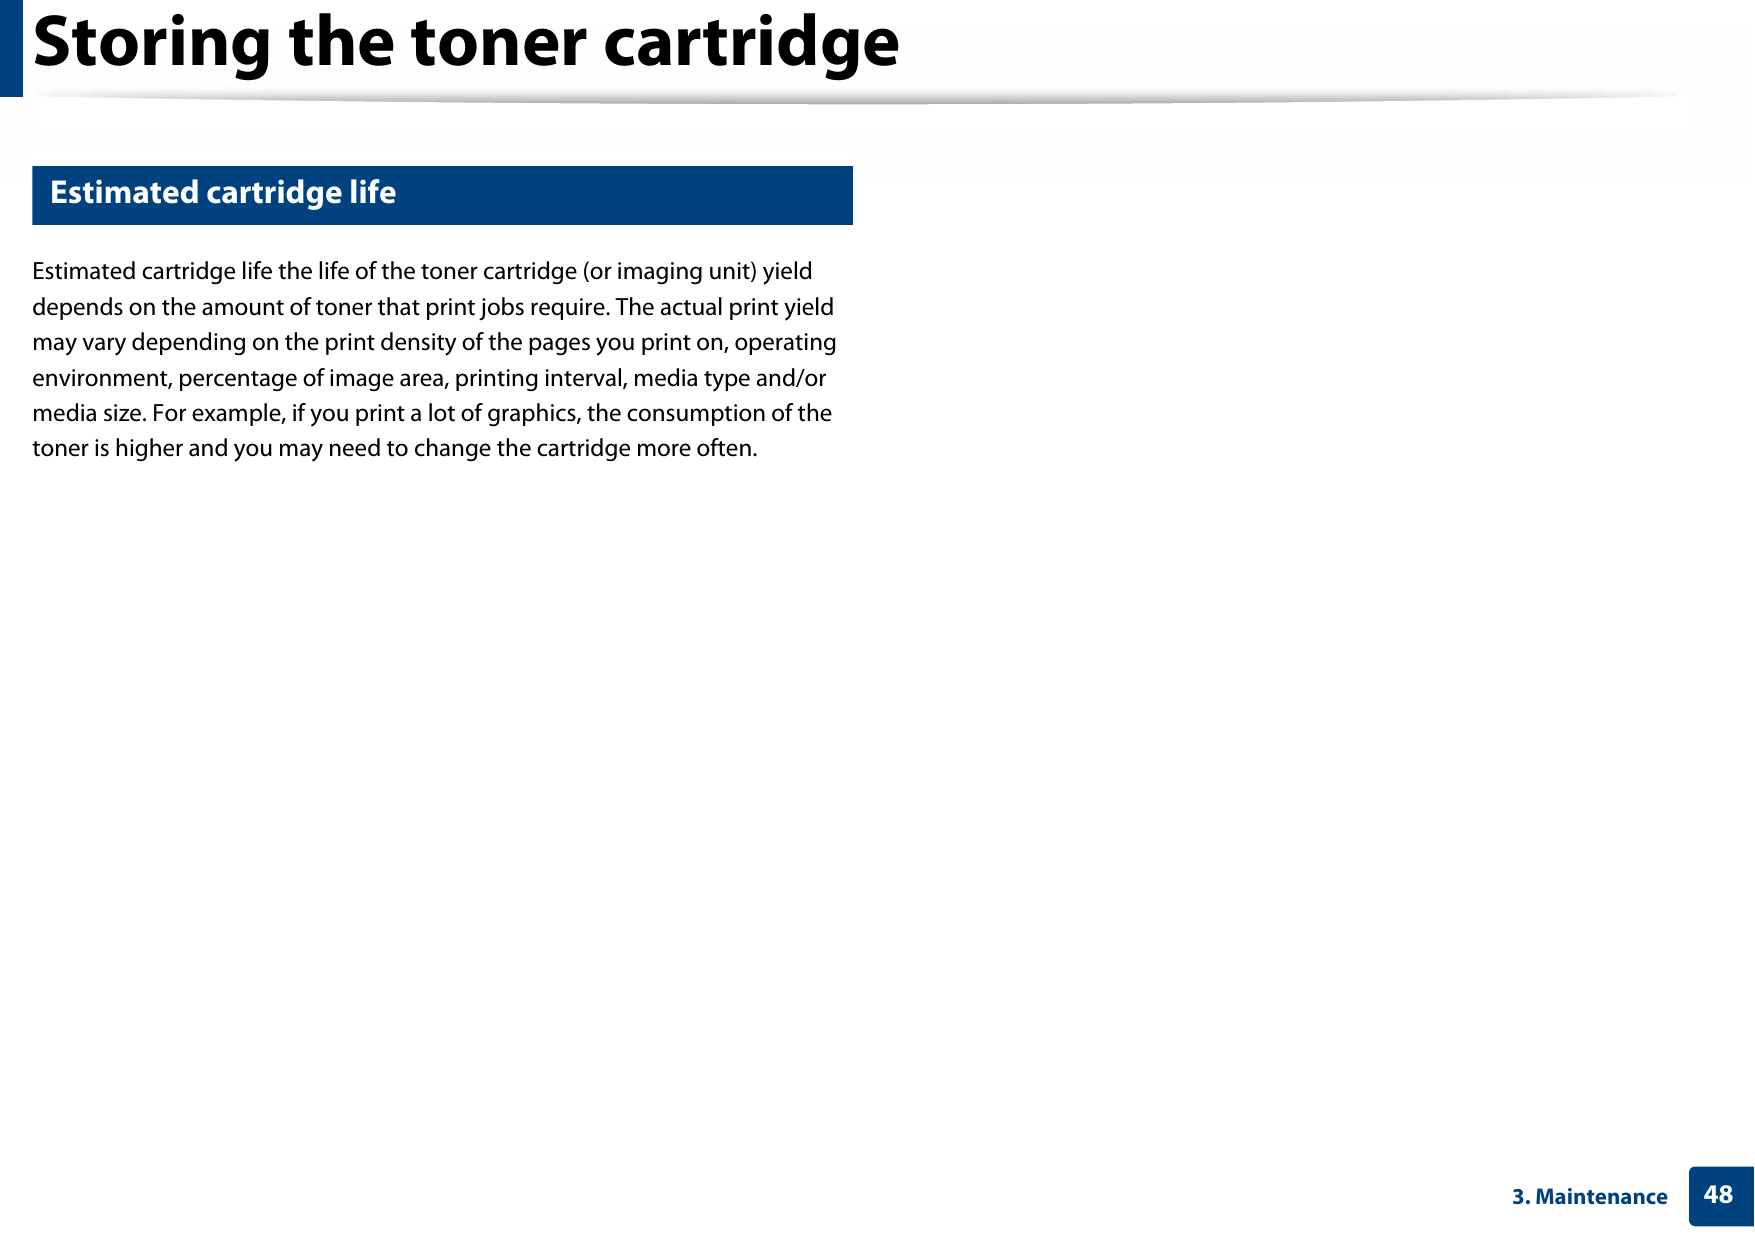 Storing the toner cartridge483. Maintenance3 Estimated cartridge lifeEstimated cartridge life the life of the toner cartridge (or imaging unit) yield depends on the amount of toner that print jobs require. The actual print yield may vary depending on the print density of the pages you print on, operating environment, percentage of image area, printing interval, media type and/or media size. For example, if you print a lot of graphics, the consumption of the toner is higher and you may need to change the cartridge more often.